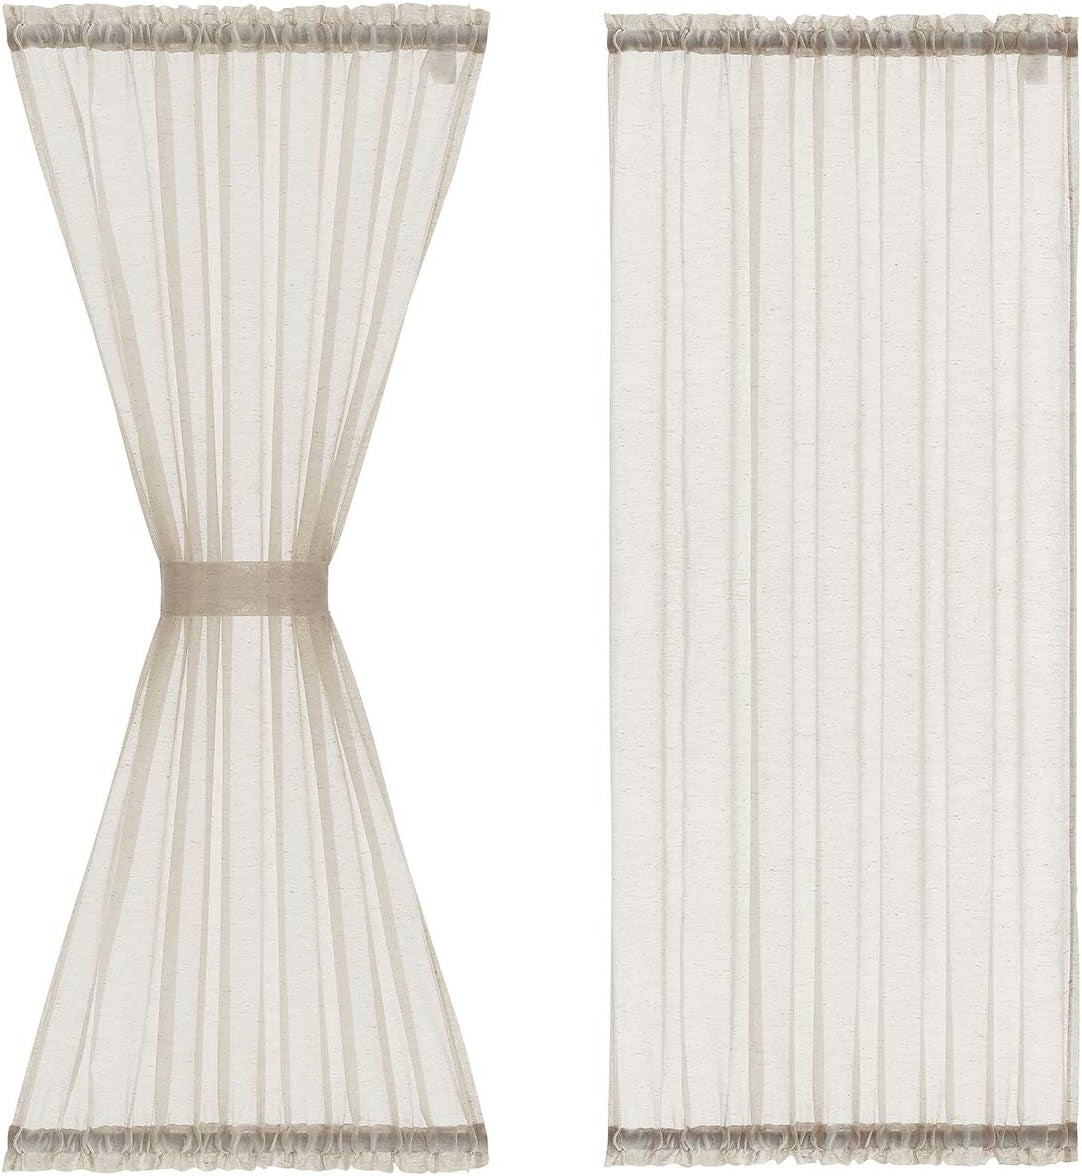 Sidelight French Door Curtains 72" Long Flax Linen Blend Sheer Panels Privacy Side Door Curtains Including Tiebacks for Sliding Glass Door Patio Windows, Natural, 25Inch Wide X 2 Pieces  Fmfunctex Natural 52"X72"L 2Pcs 